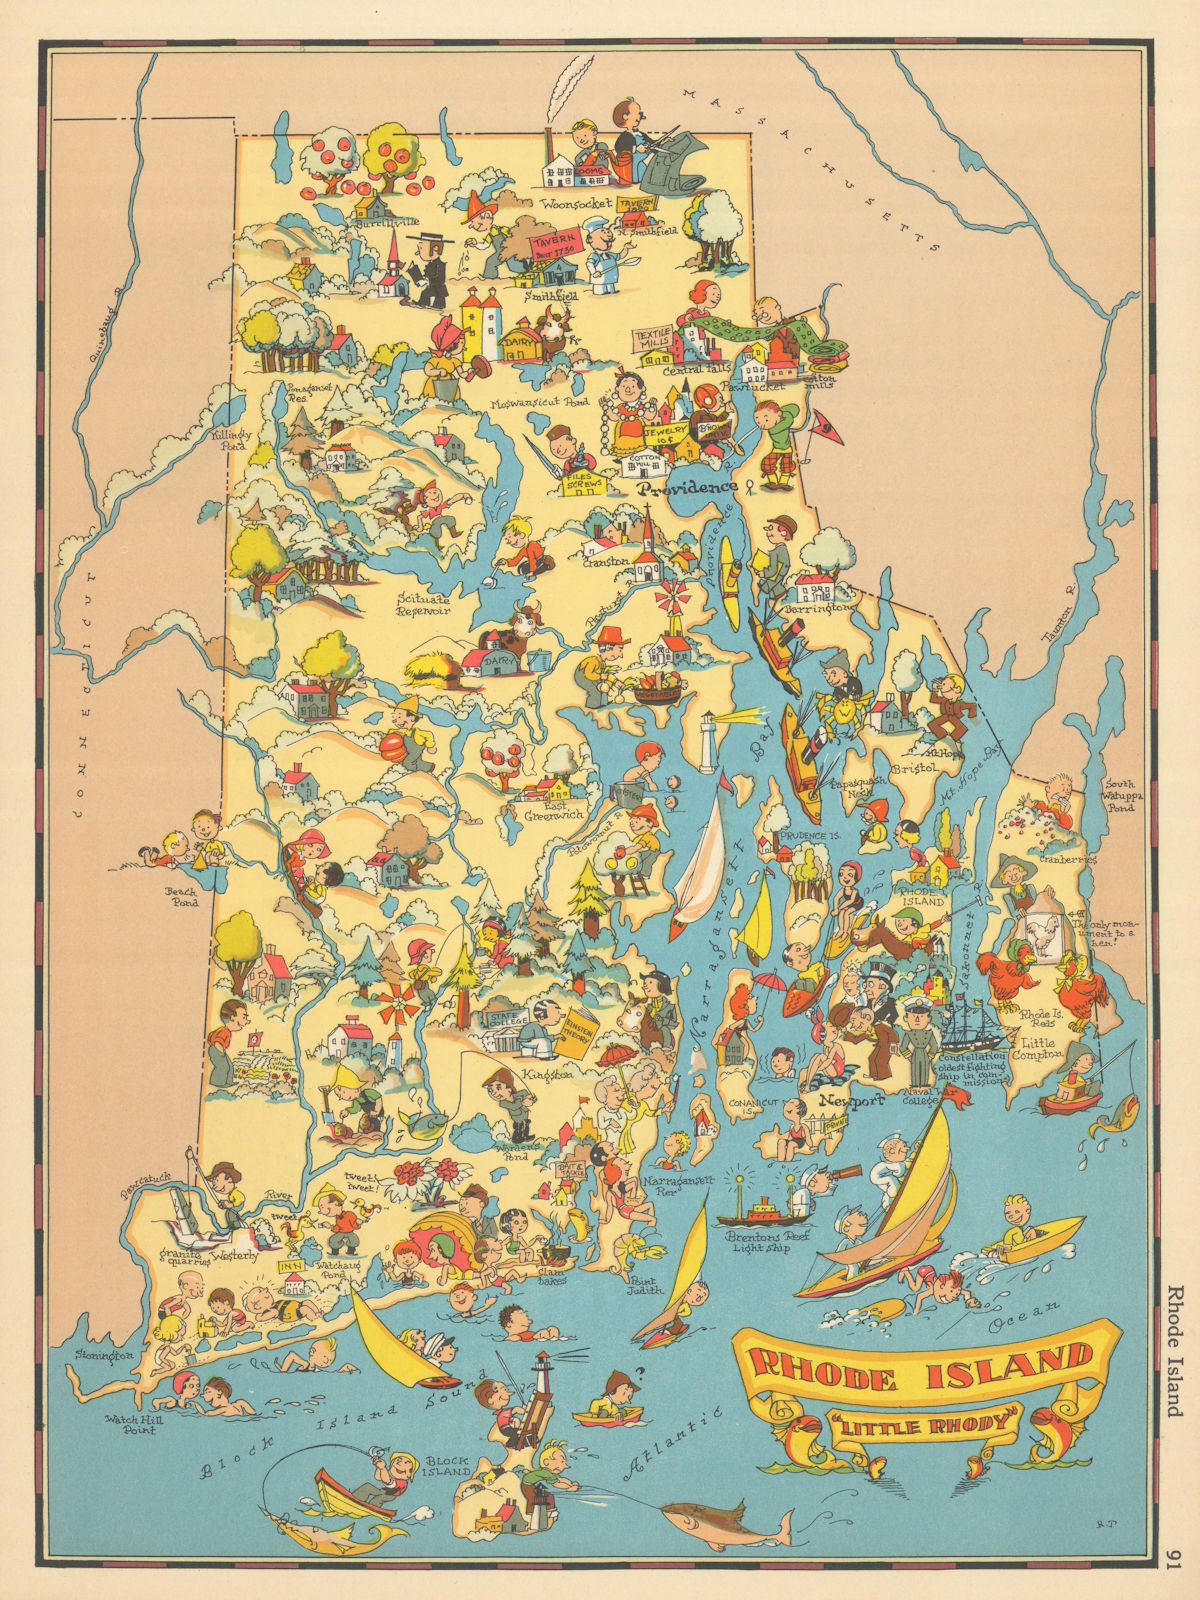 Rhode Island "Little Rhody". Pictorial state map by Ruth Taylor White 1935